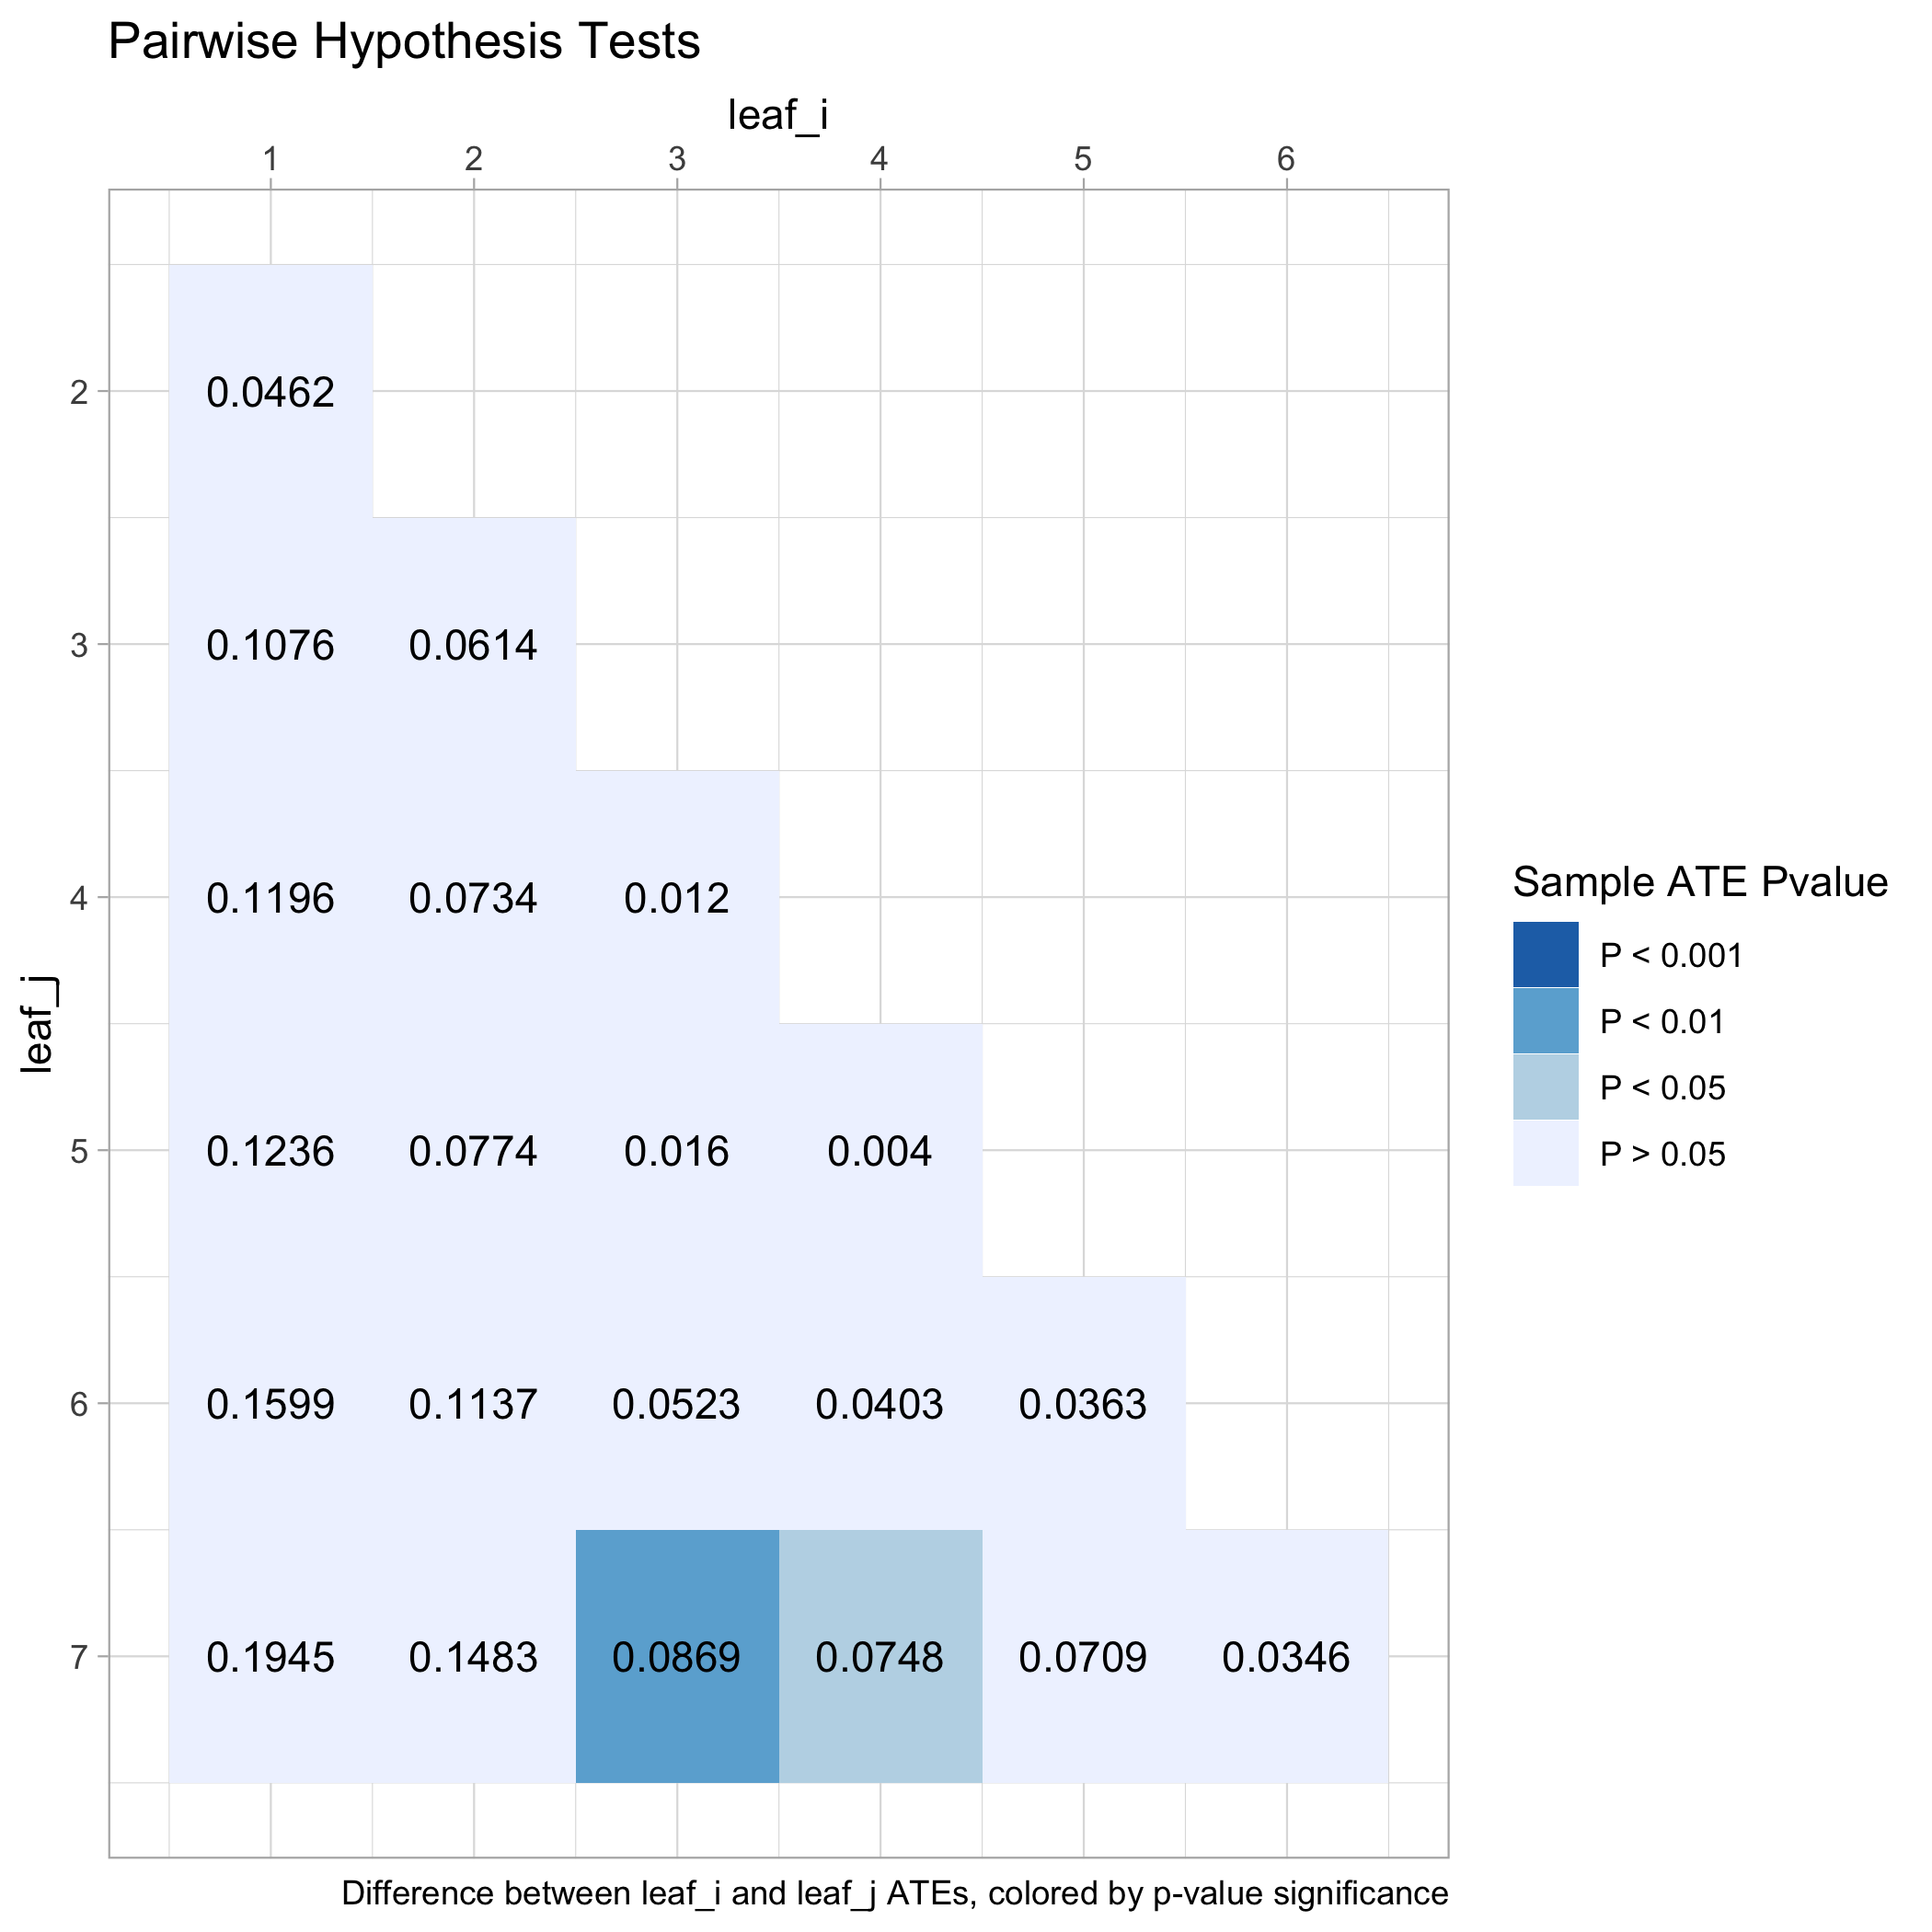 Pairwise differences in honest average treatment effect estimates across leaves of the causal tree, colored by p-values from test of pairwise equality.